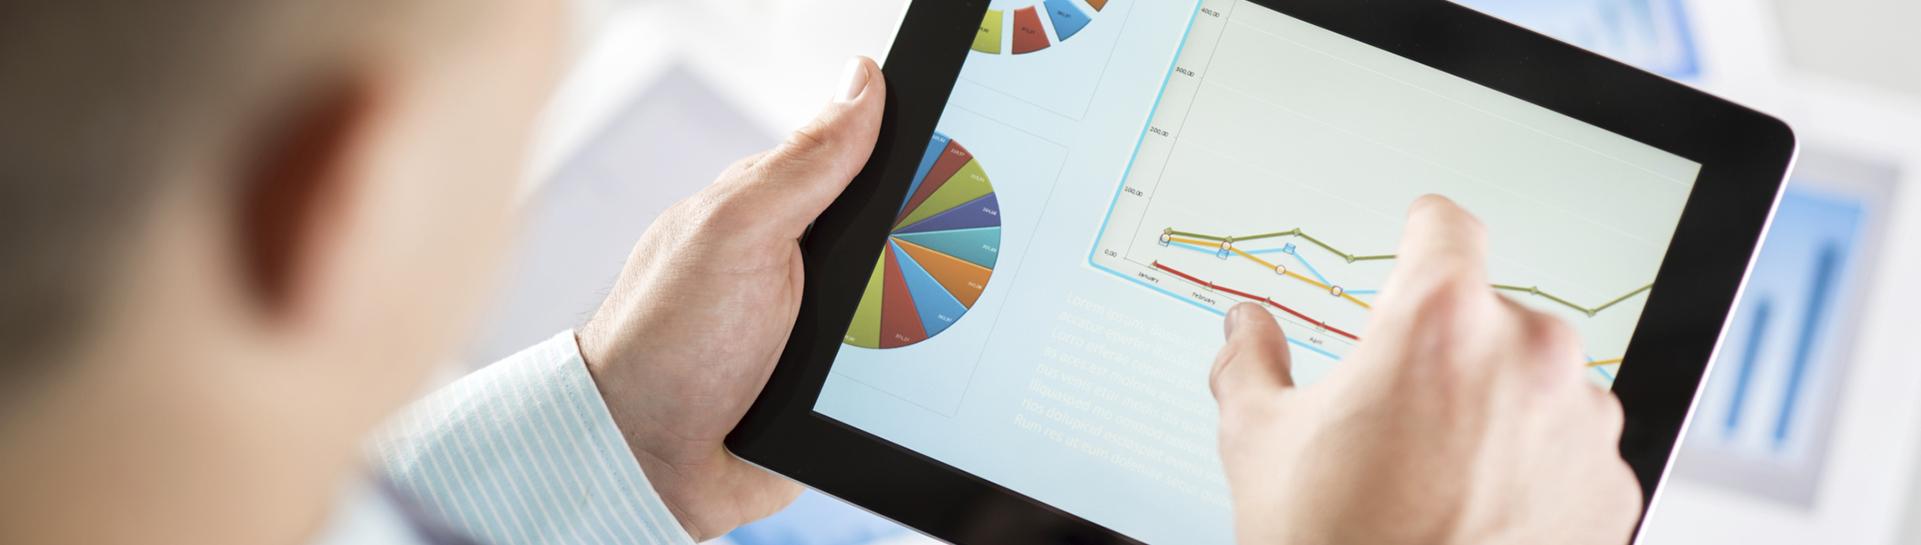 A business person looking at charts and graphs on a tablet